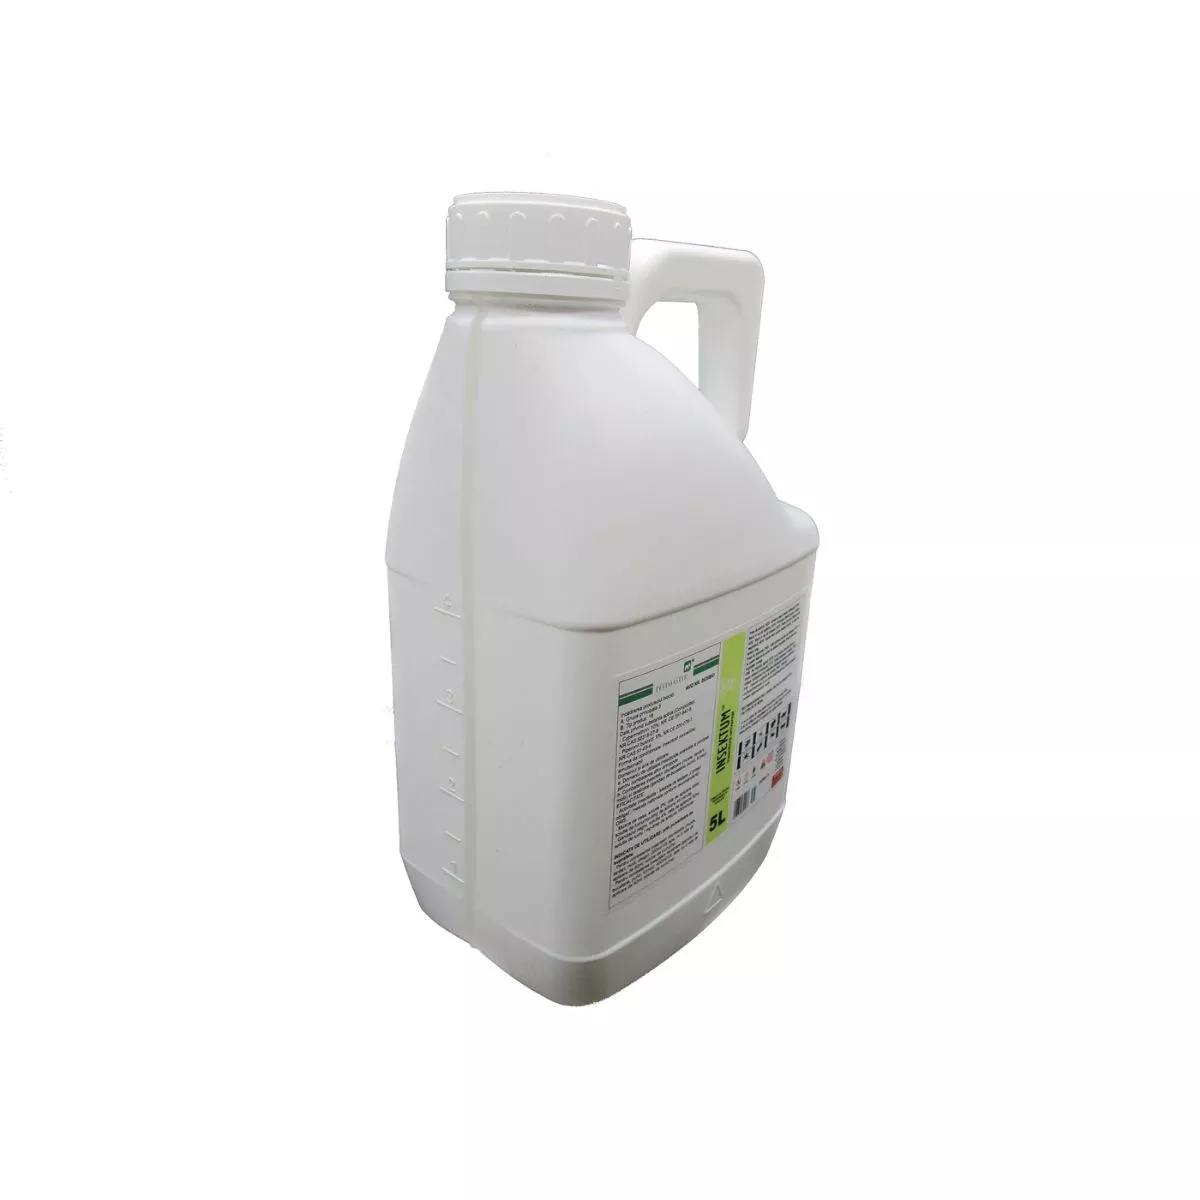 Insecticid concentrat INSEKTUM 5 L ,Pestmaster 2